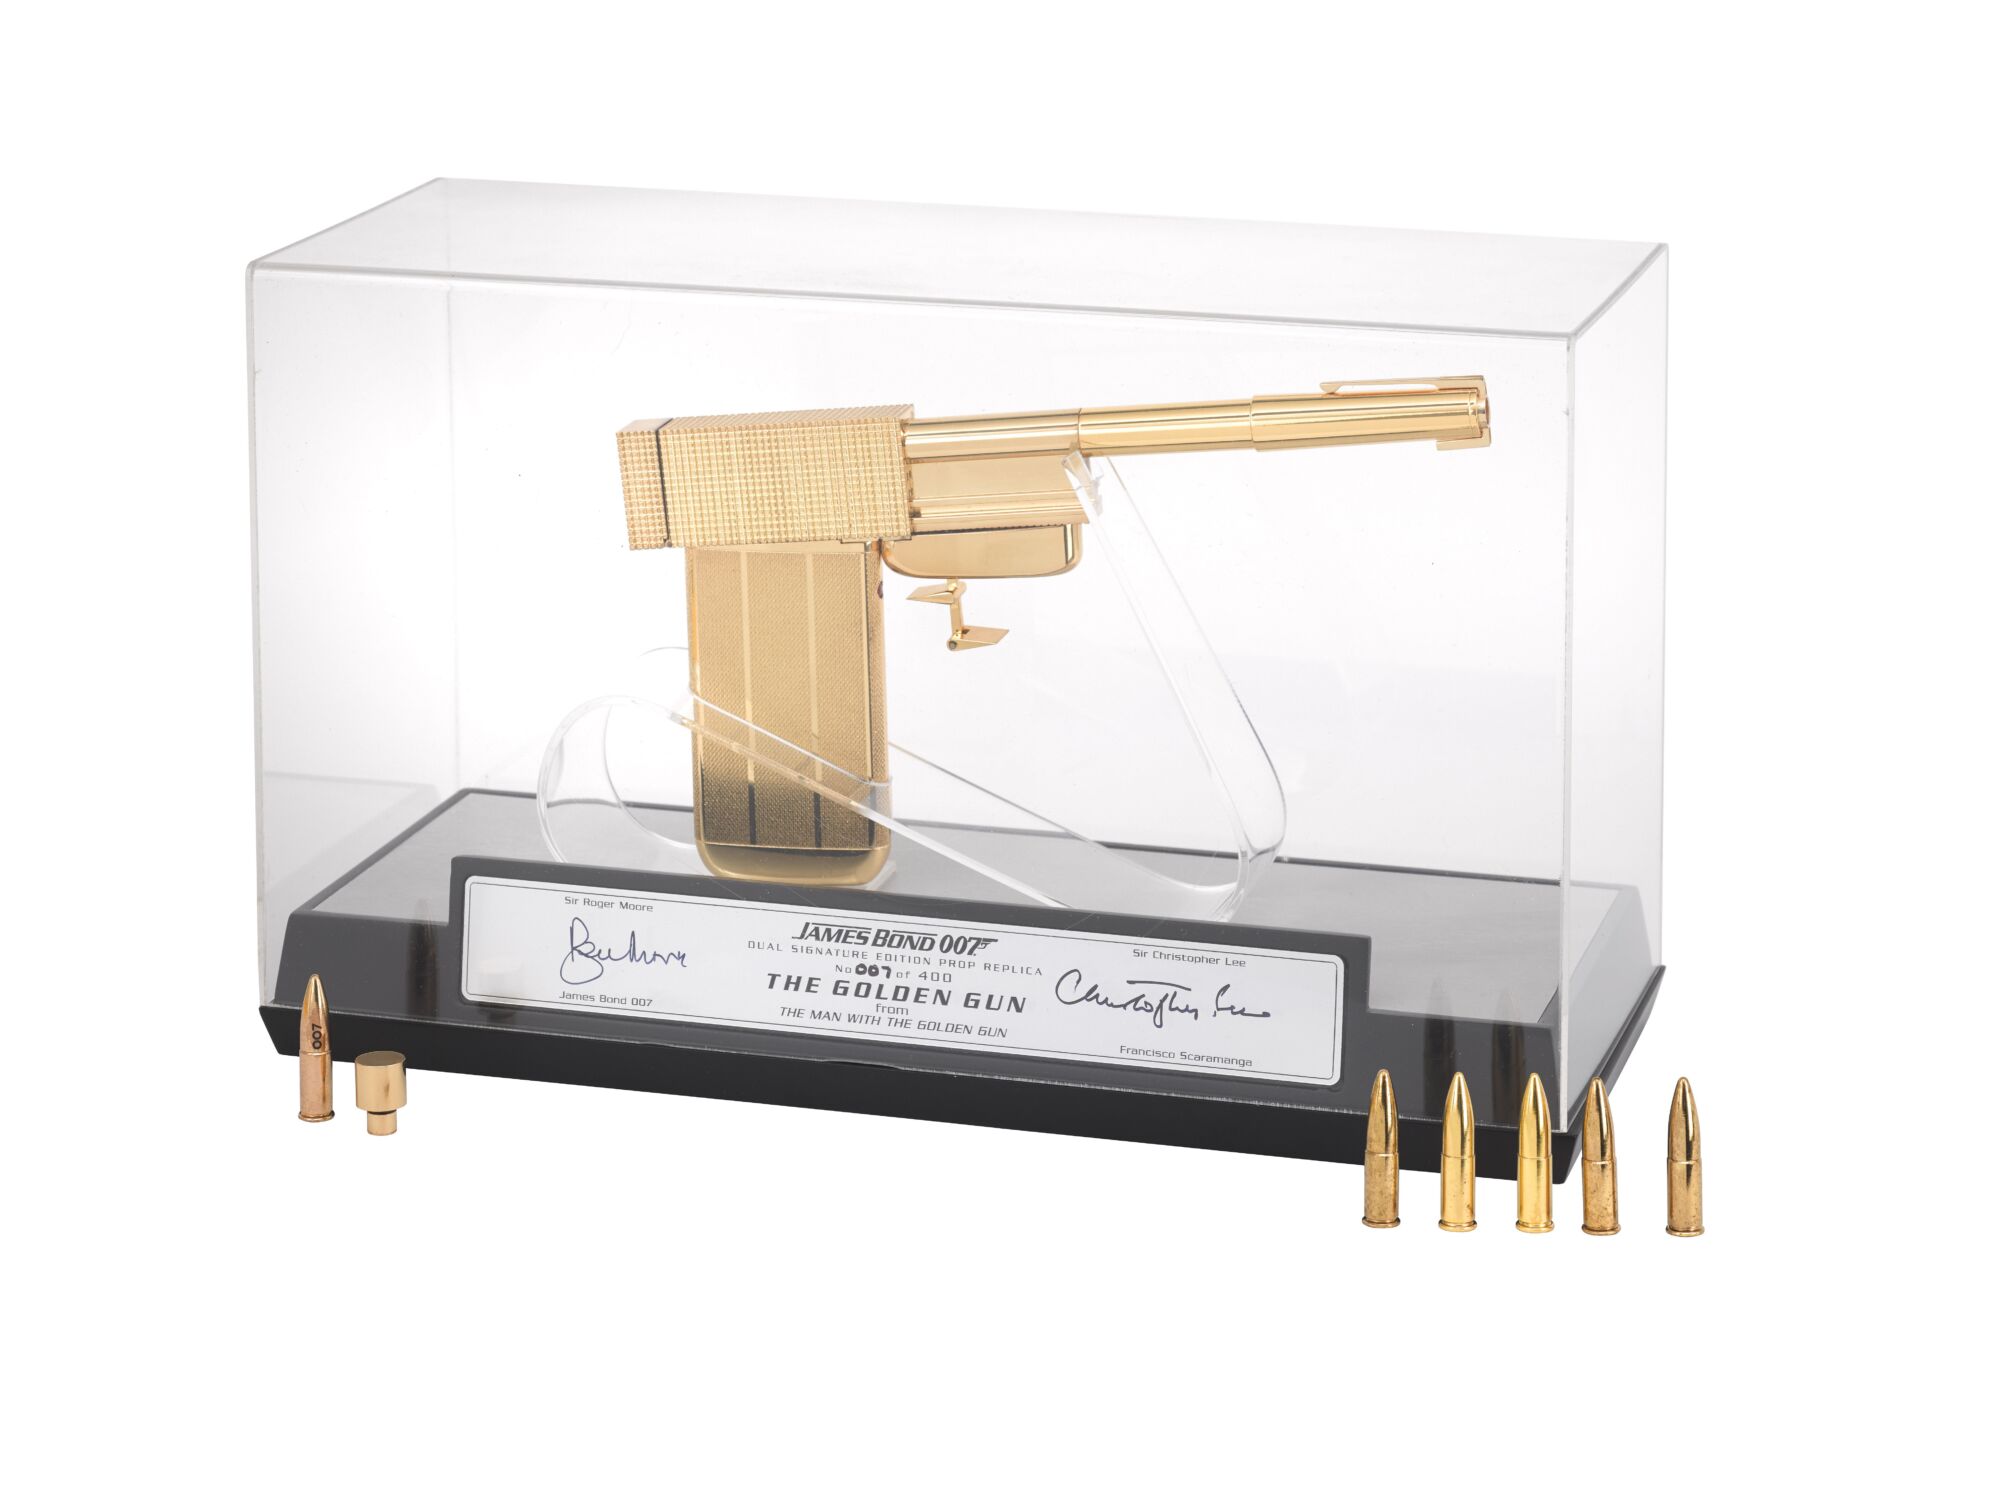 The Wick - Limited edition replica of the gun from The Man with the Golden Gun (estimate £6000 - £9000)